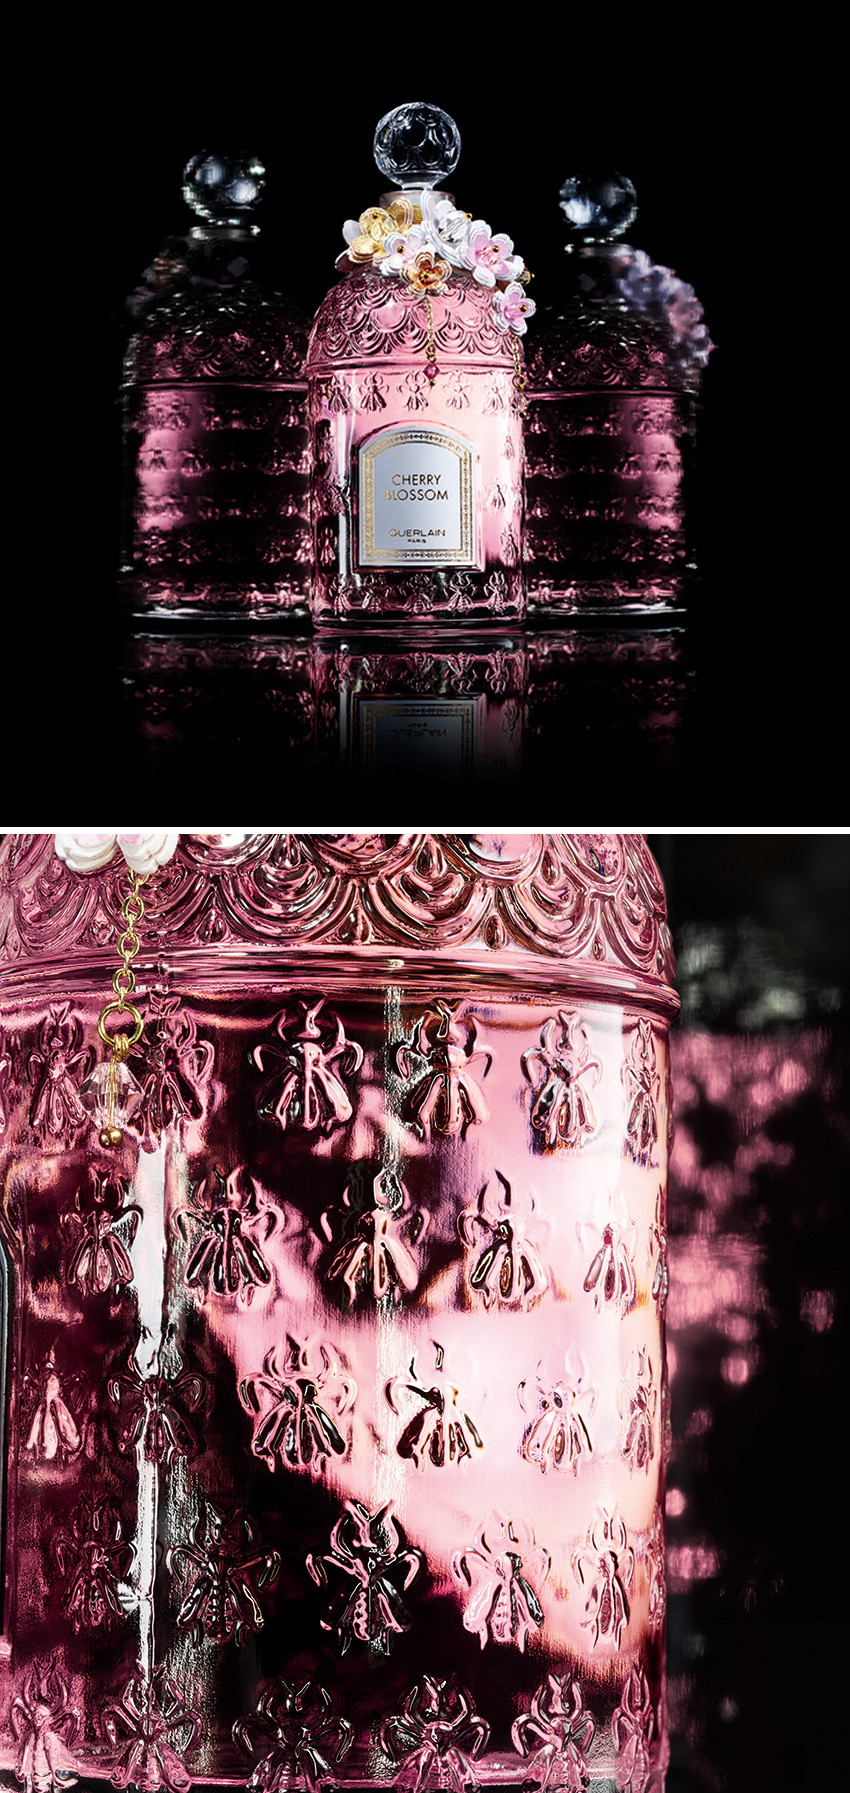 Guerlain Cherry Blossom limited edition bottle celebrates the rebirth of Spring 